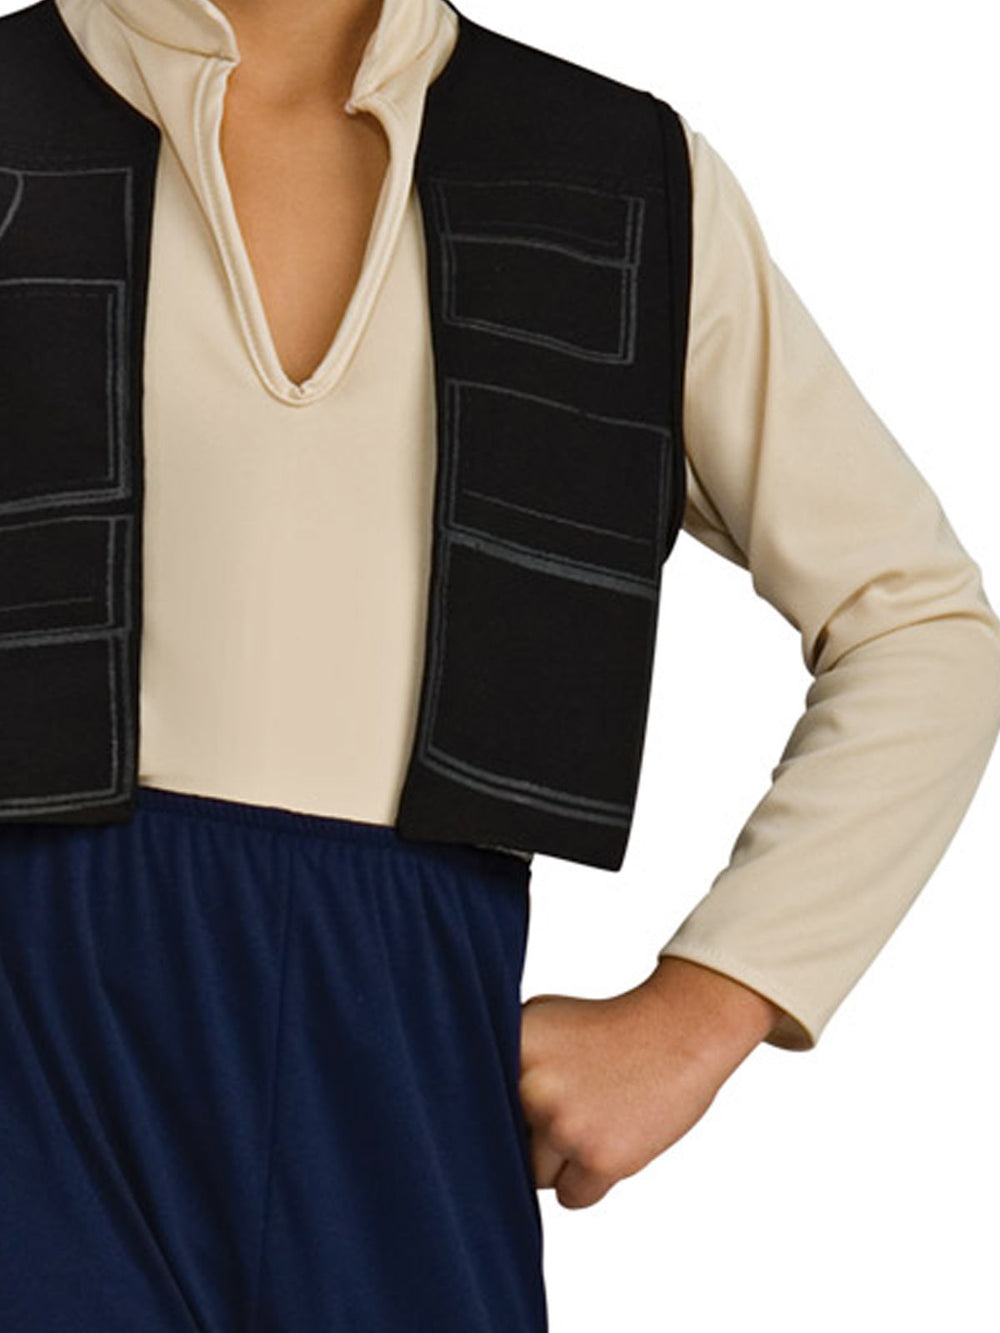 HAN SOLO DELUXE COSTUME, CHILD - Little Shop of Horrors